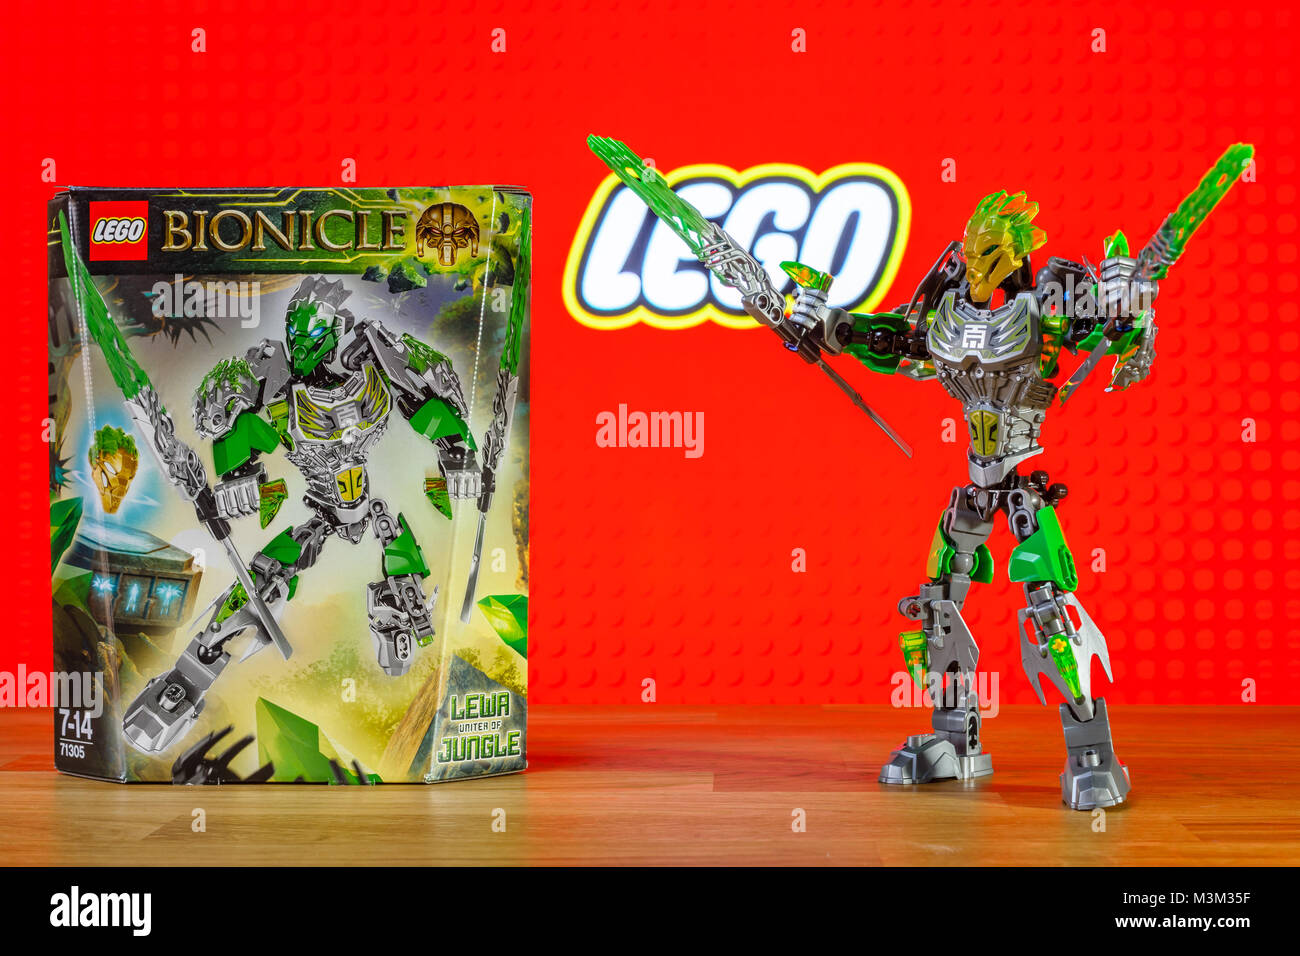 BERLIN - JUNE 17, 2016: A character (toy) universe of Lego Bionicle - Lewa,  Uniter of Jungle. BIONICLE is a line of construction toys created by the  Lego Group Stock Photo - Alamy